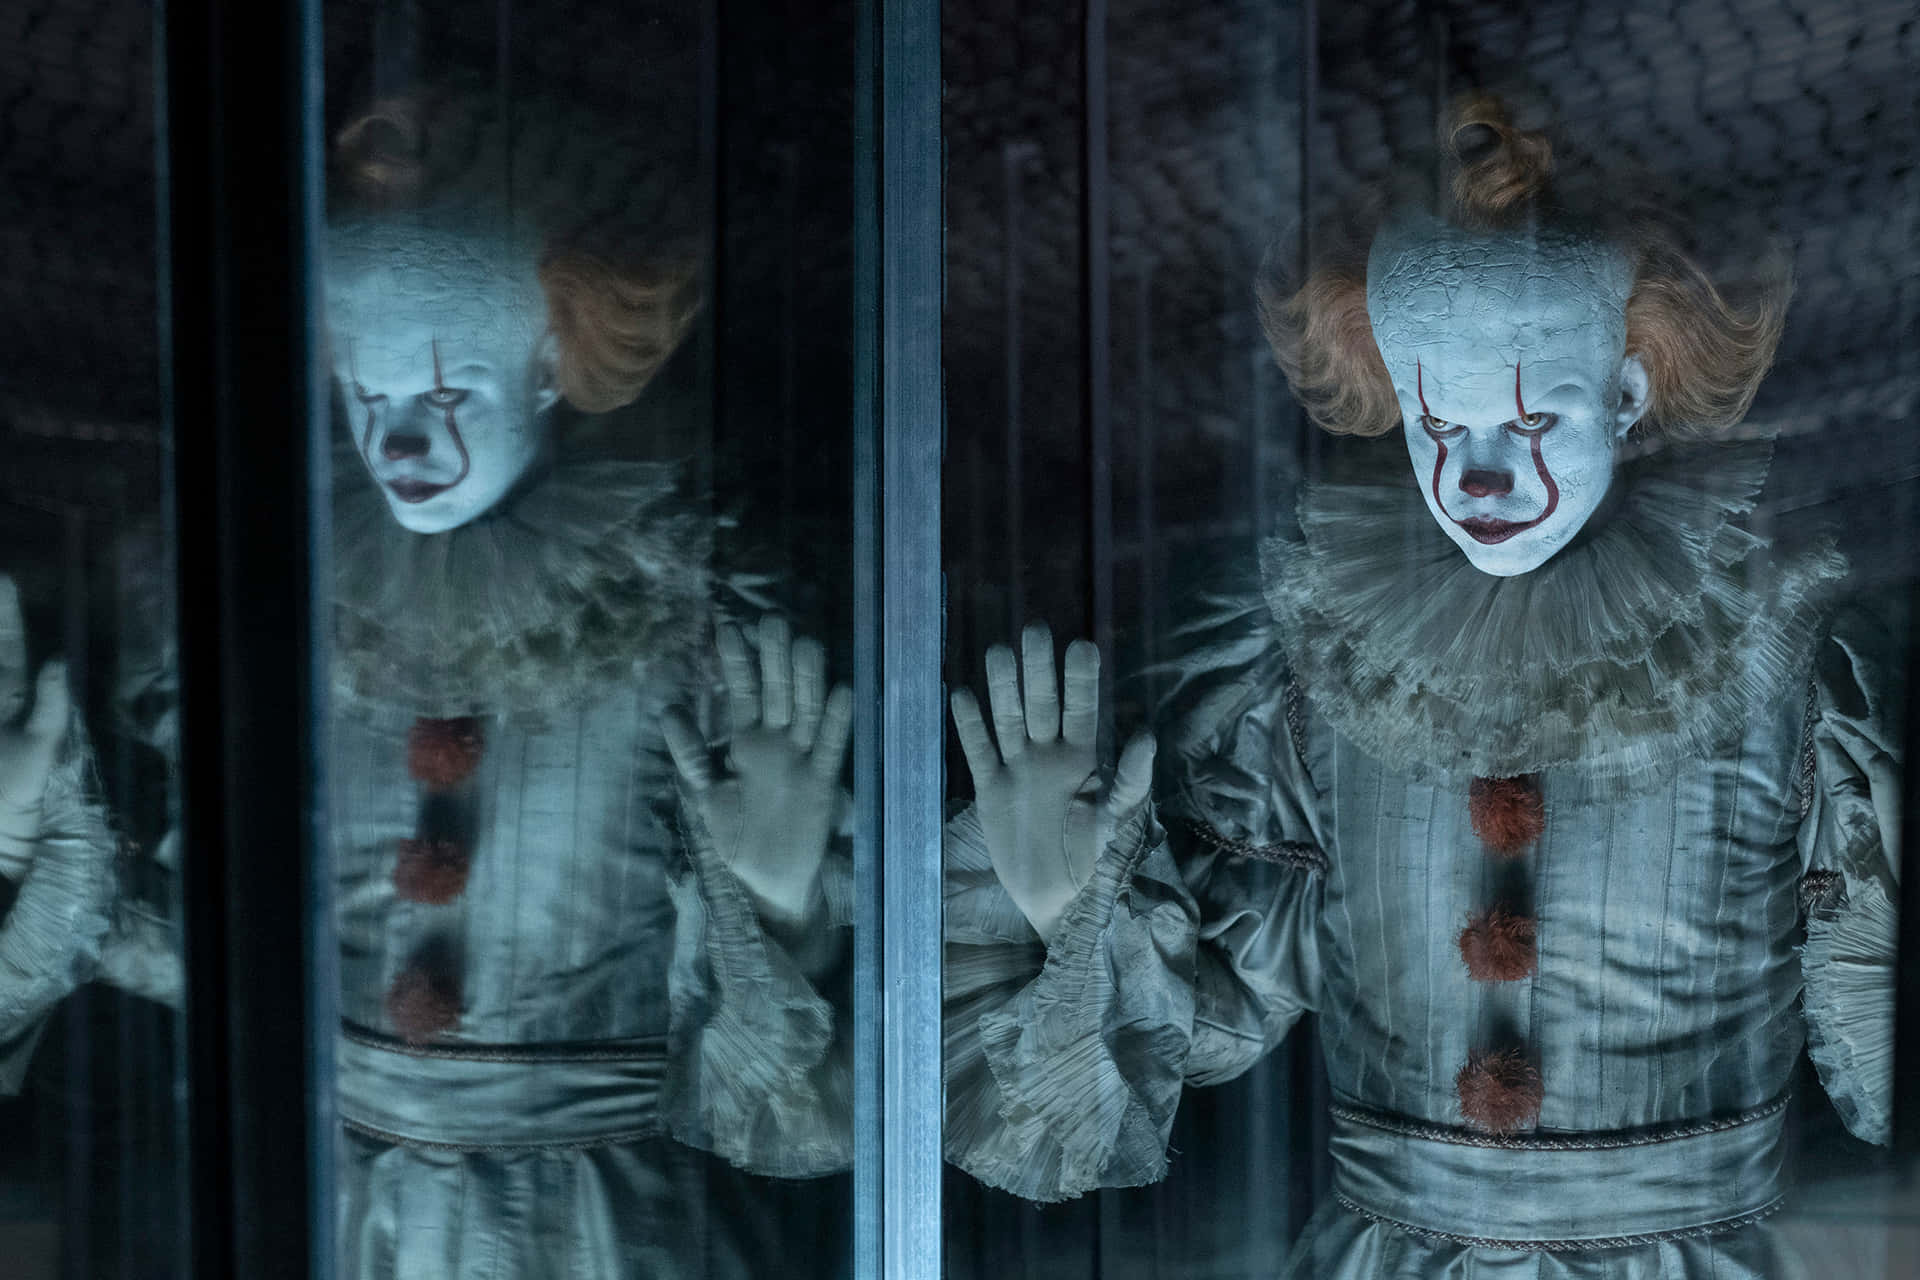 Sinister Scare: A terrifyingly eerie clown captured in a chilling still.